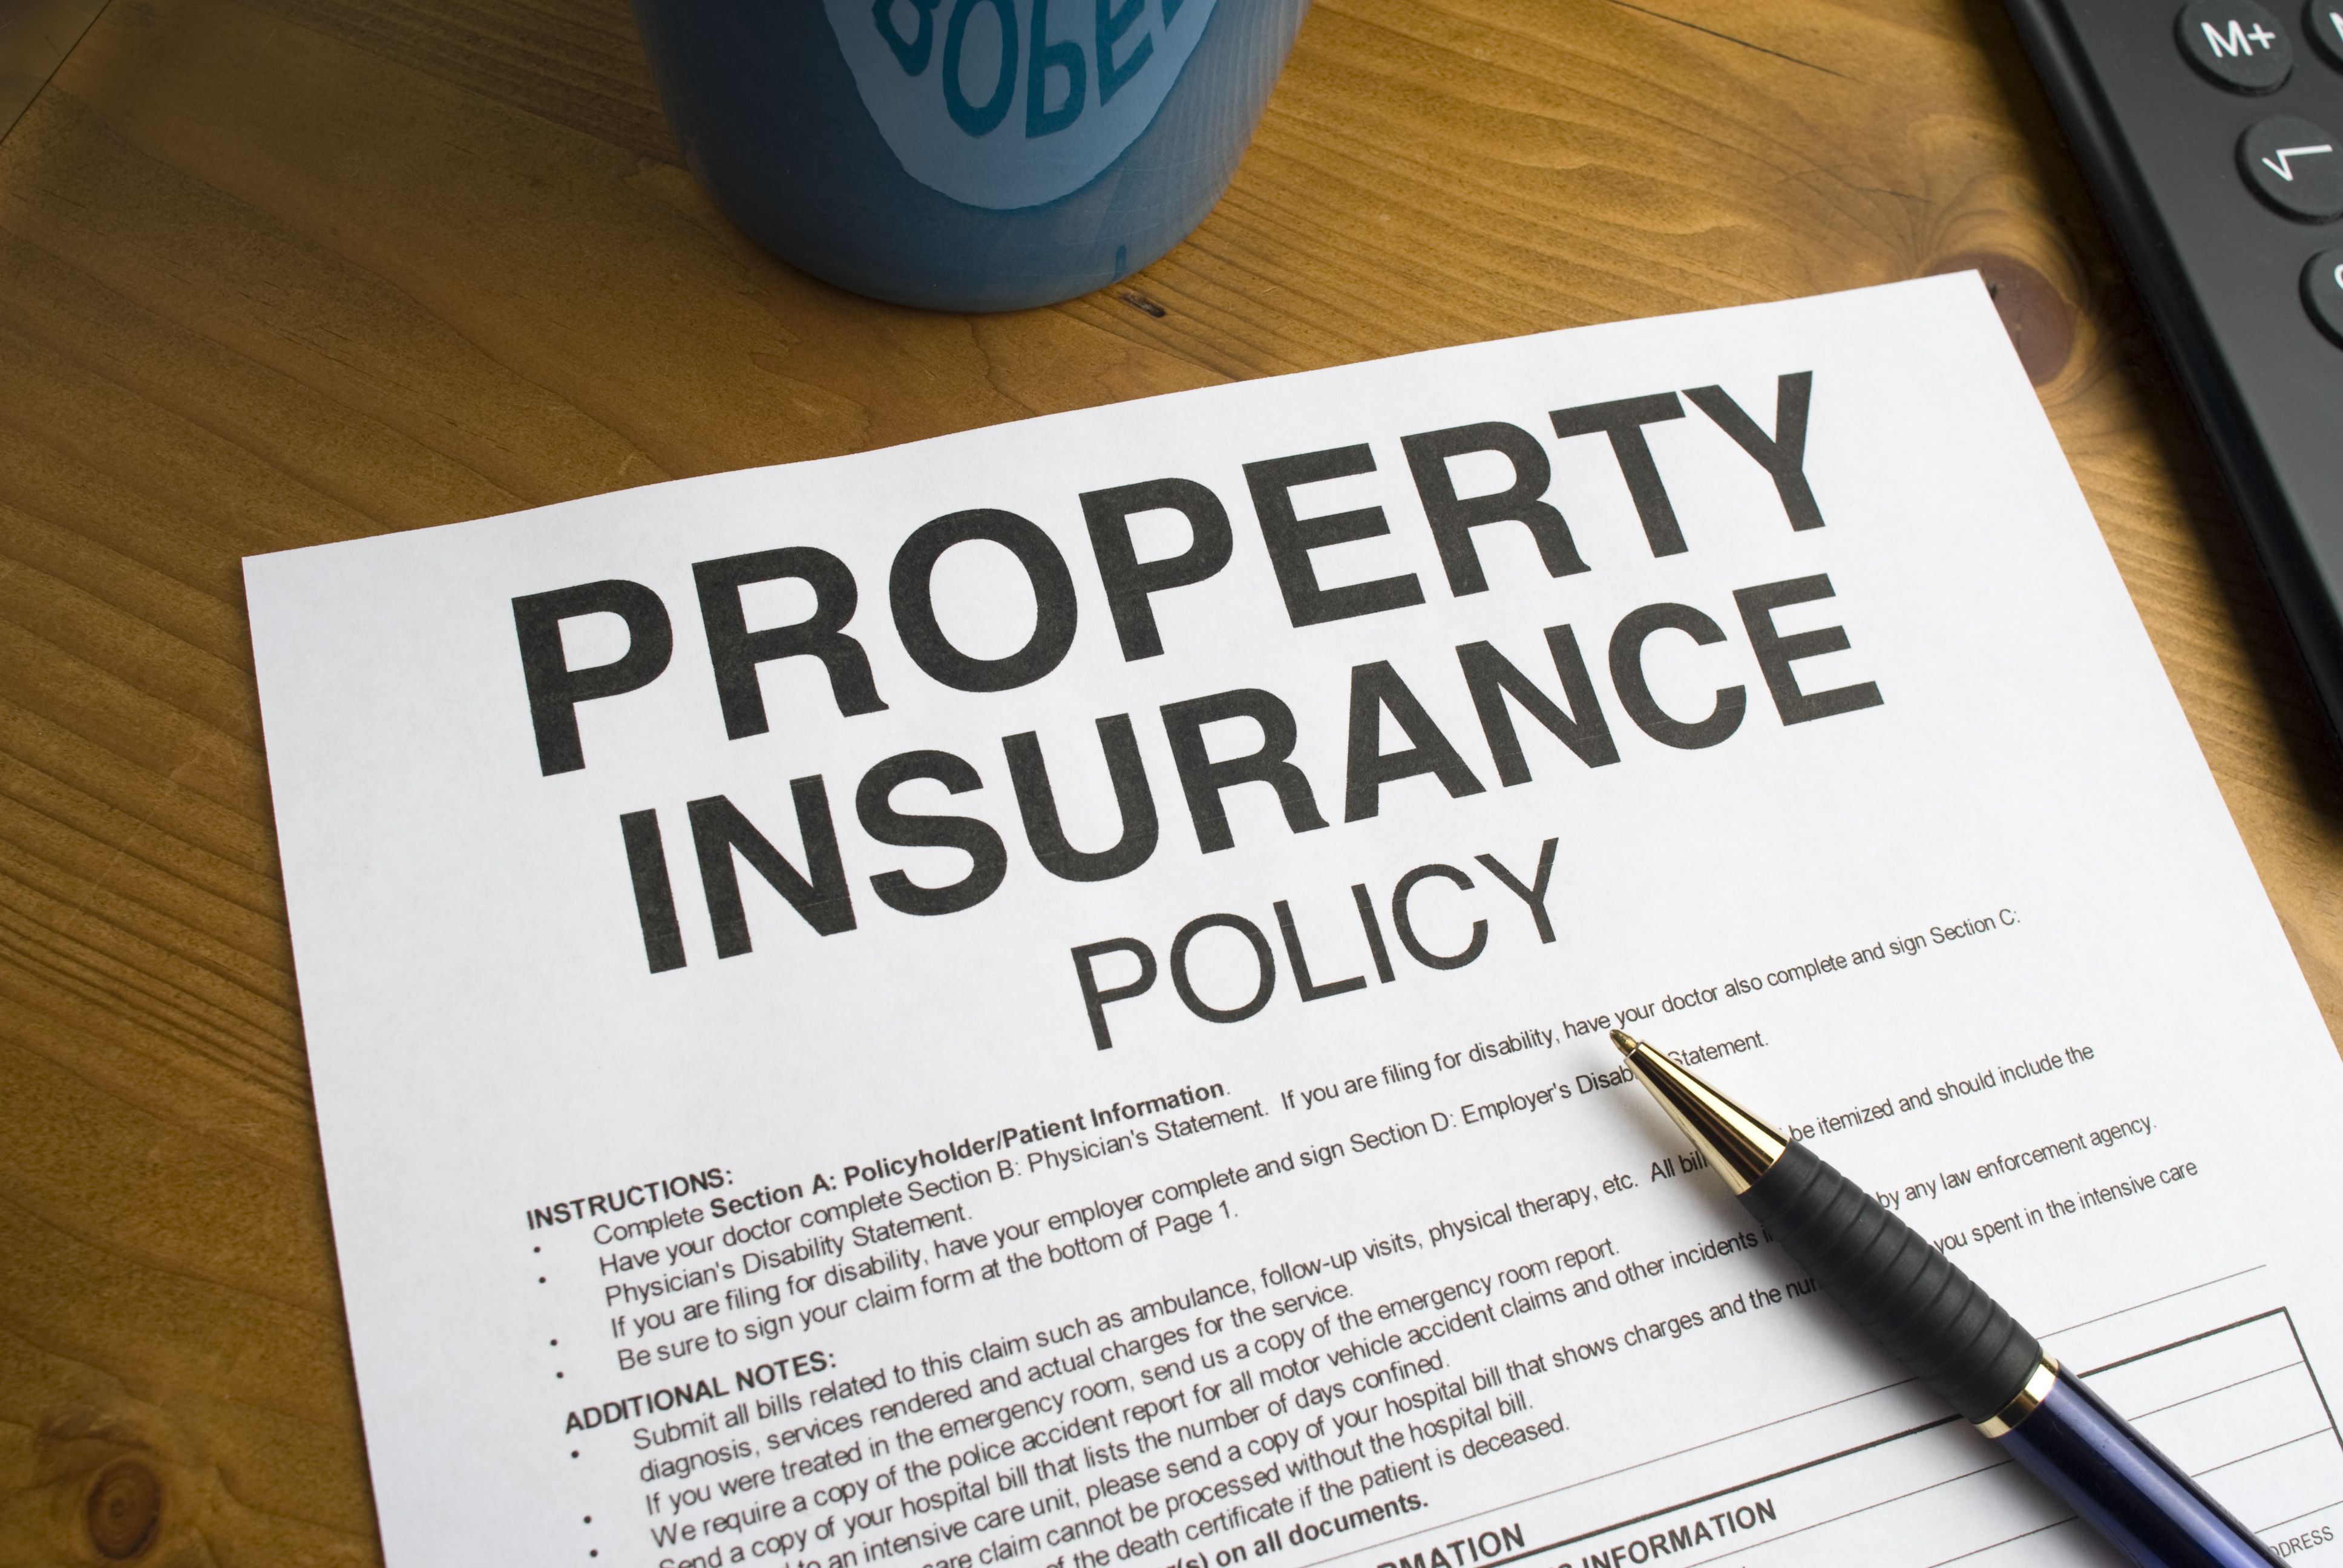 WHAT IS PROPERTY INSURANCE POLICY